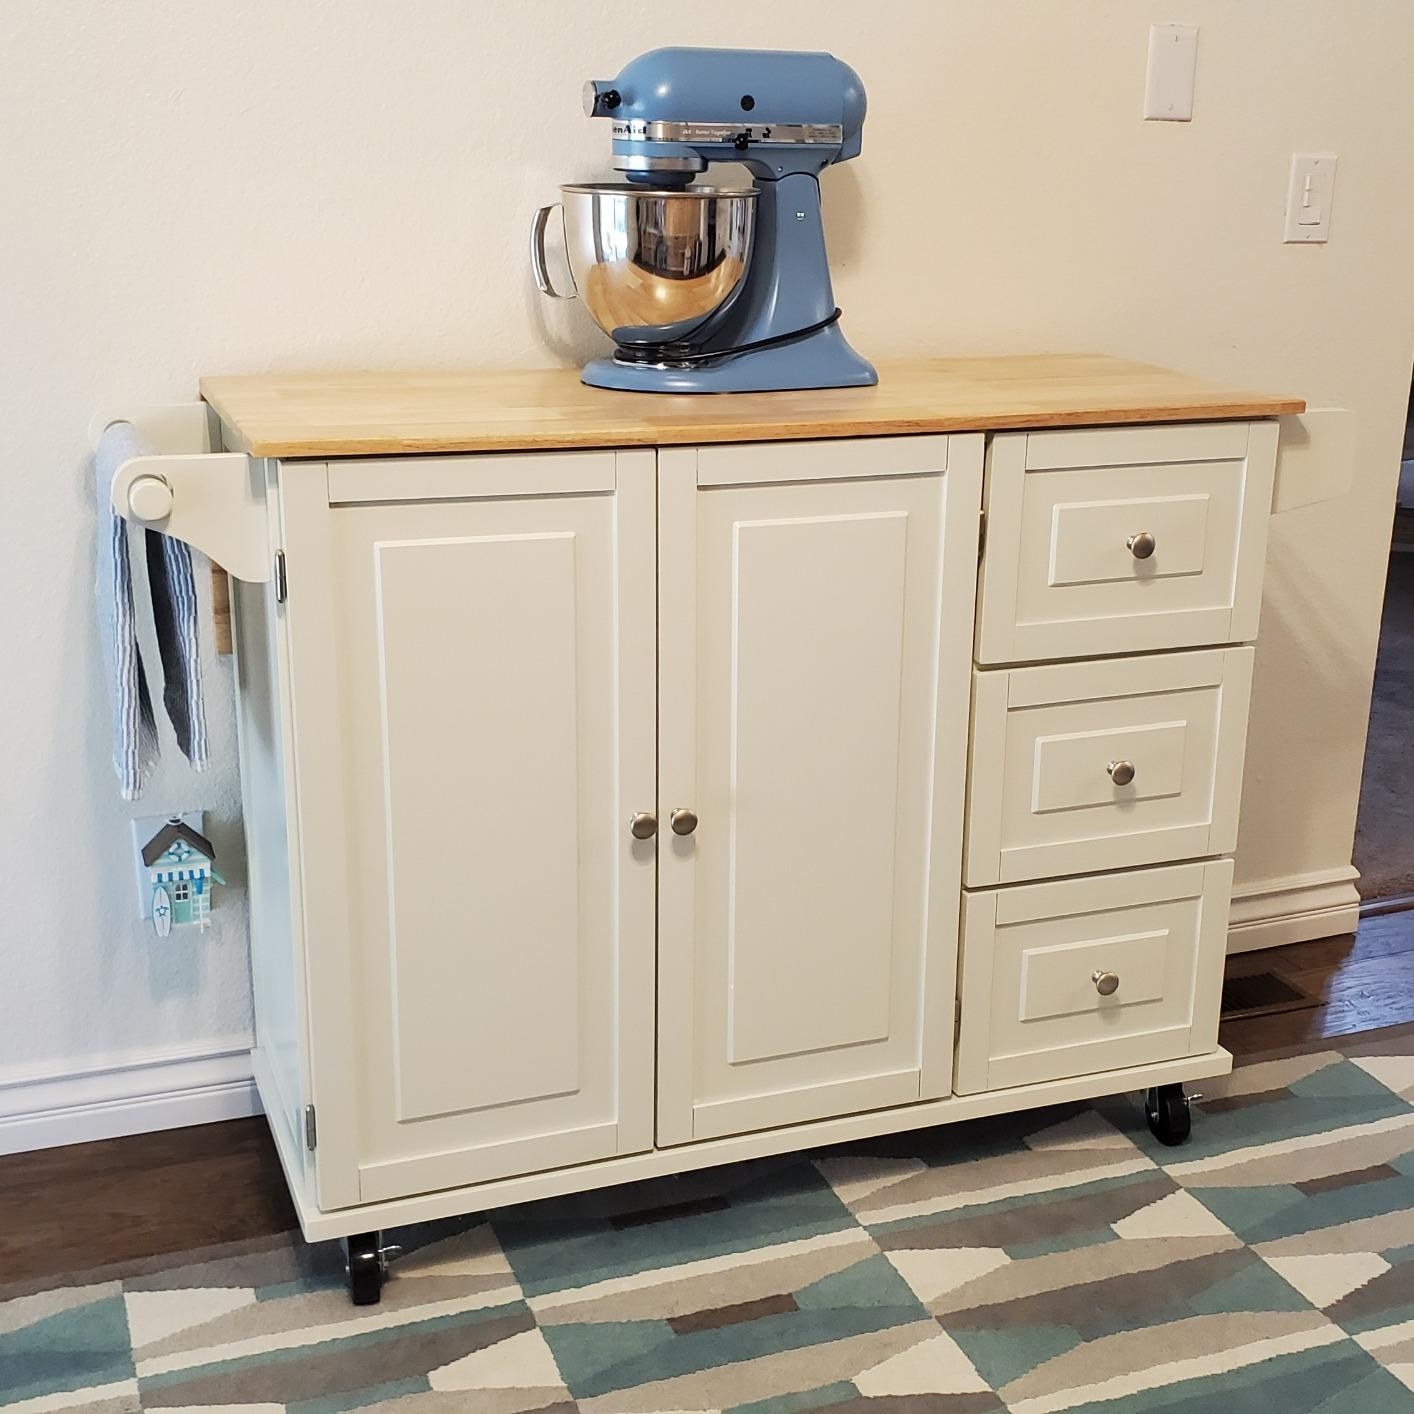 Reviewer image of the kitchen island